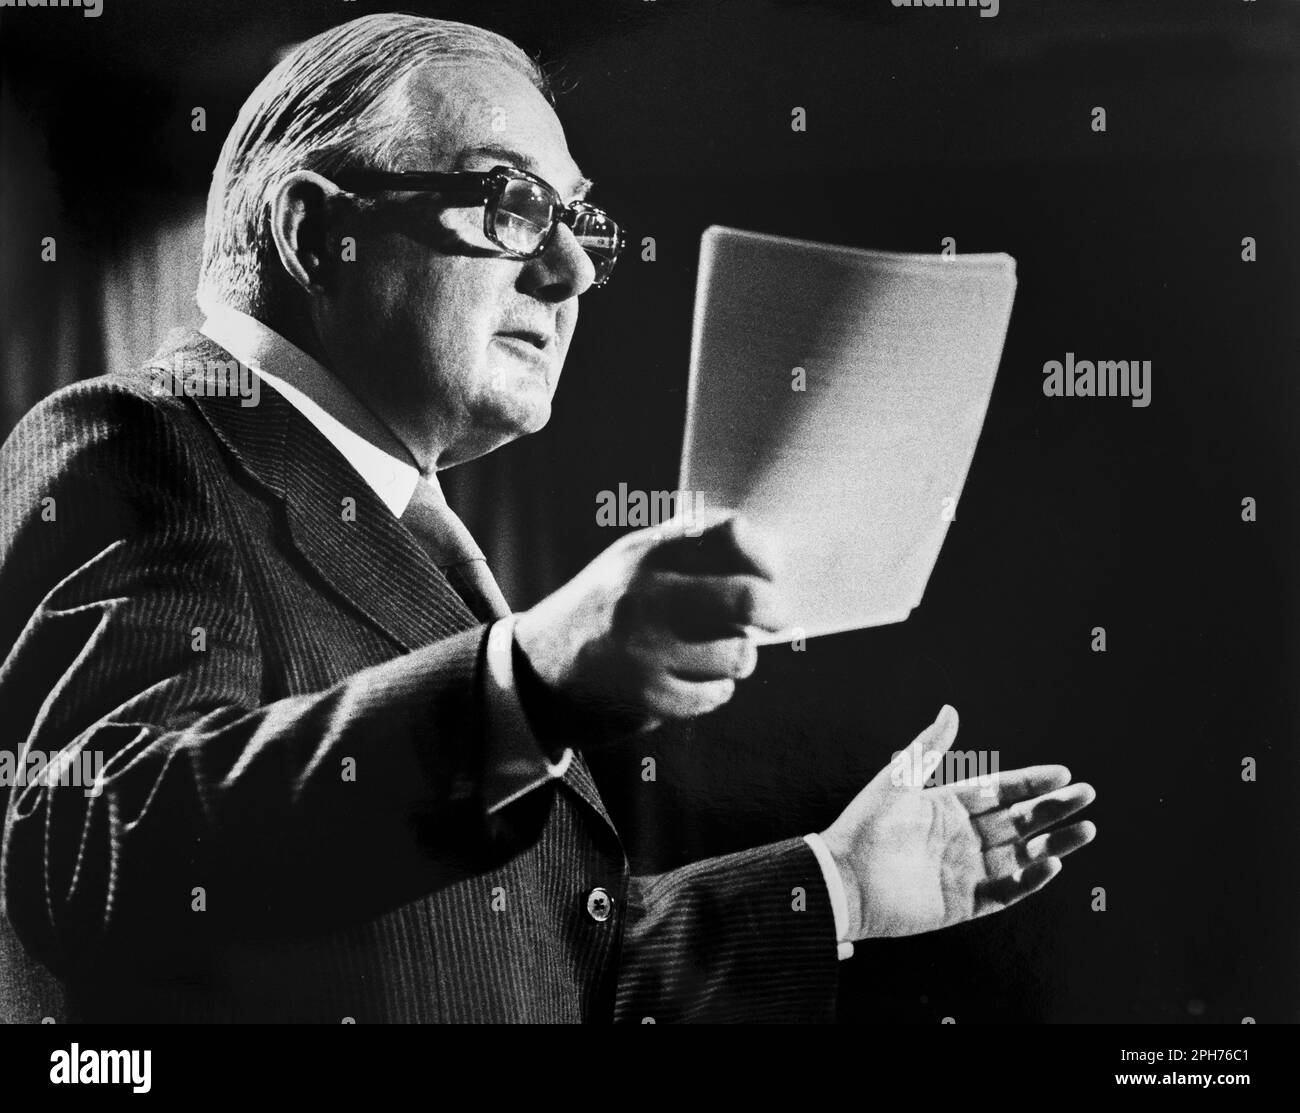 James 'Jim' Callaghan Labour politician and Prime Minister 1976-1979. Photographed in 1978. Stock Photo